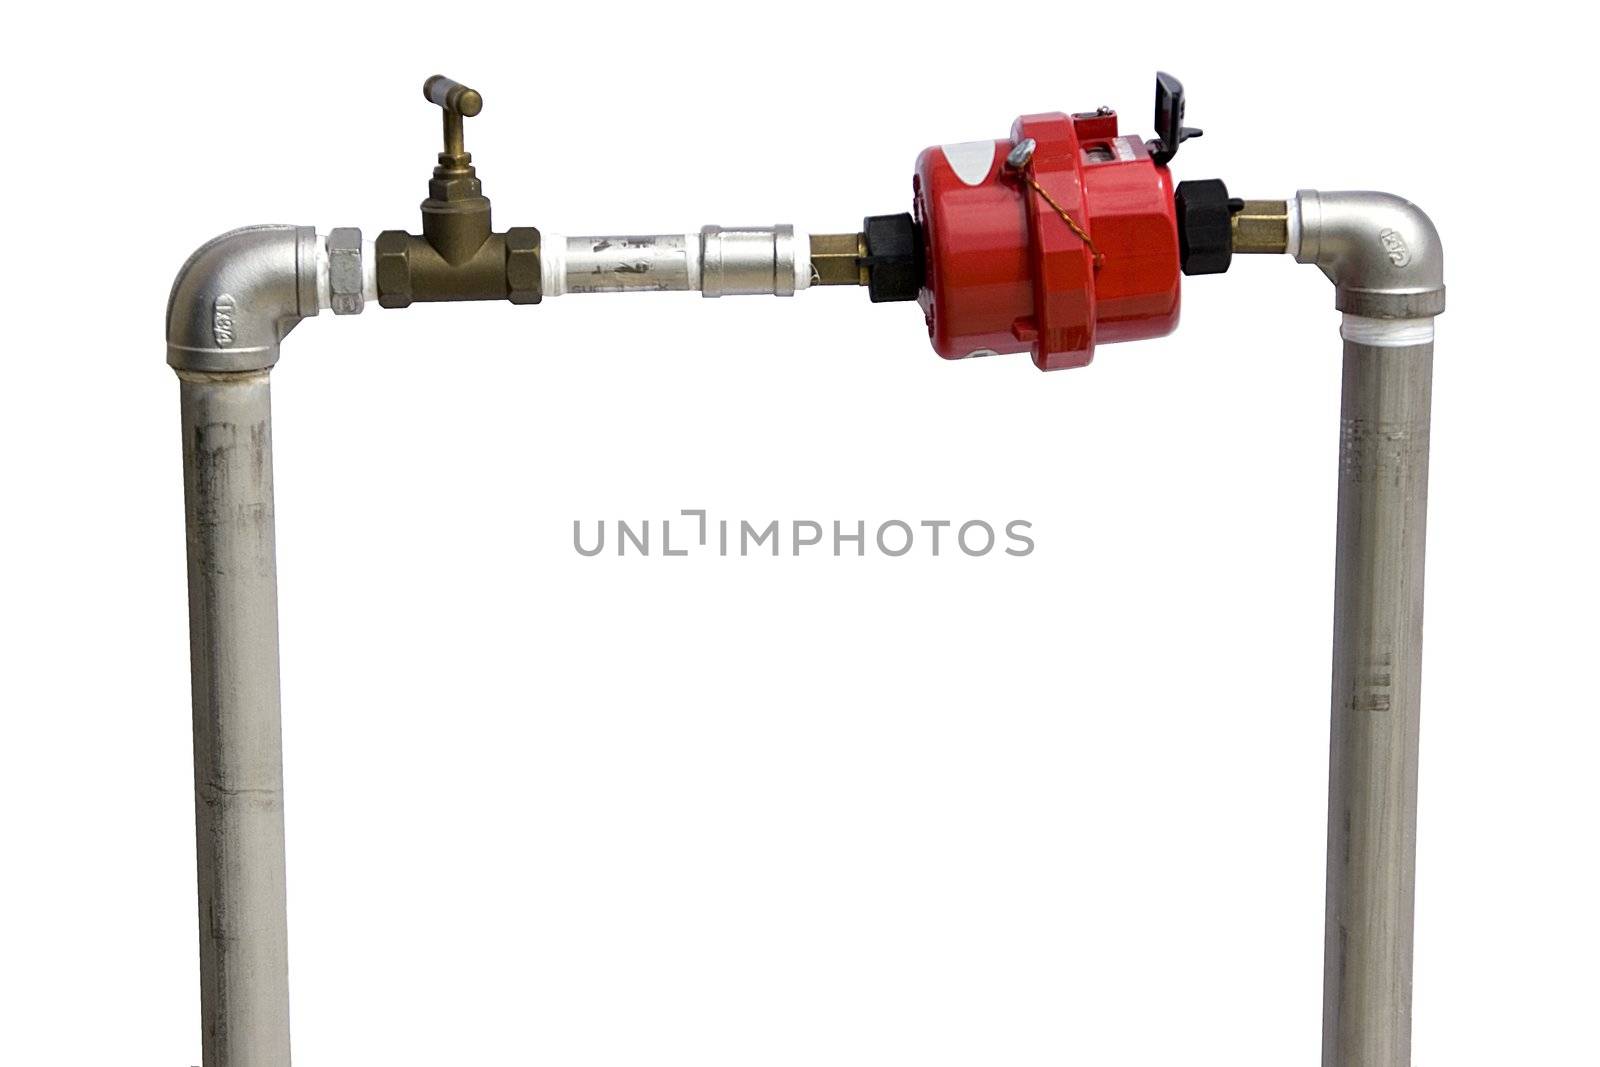 Isolated image of a water supply meter.